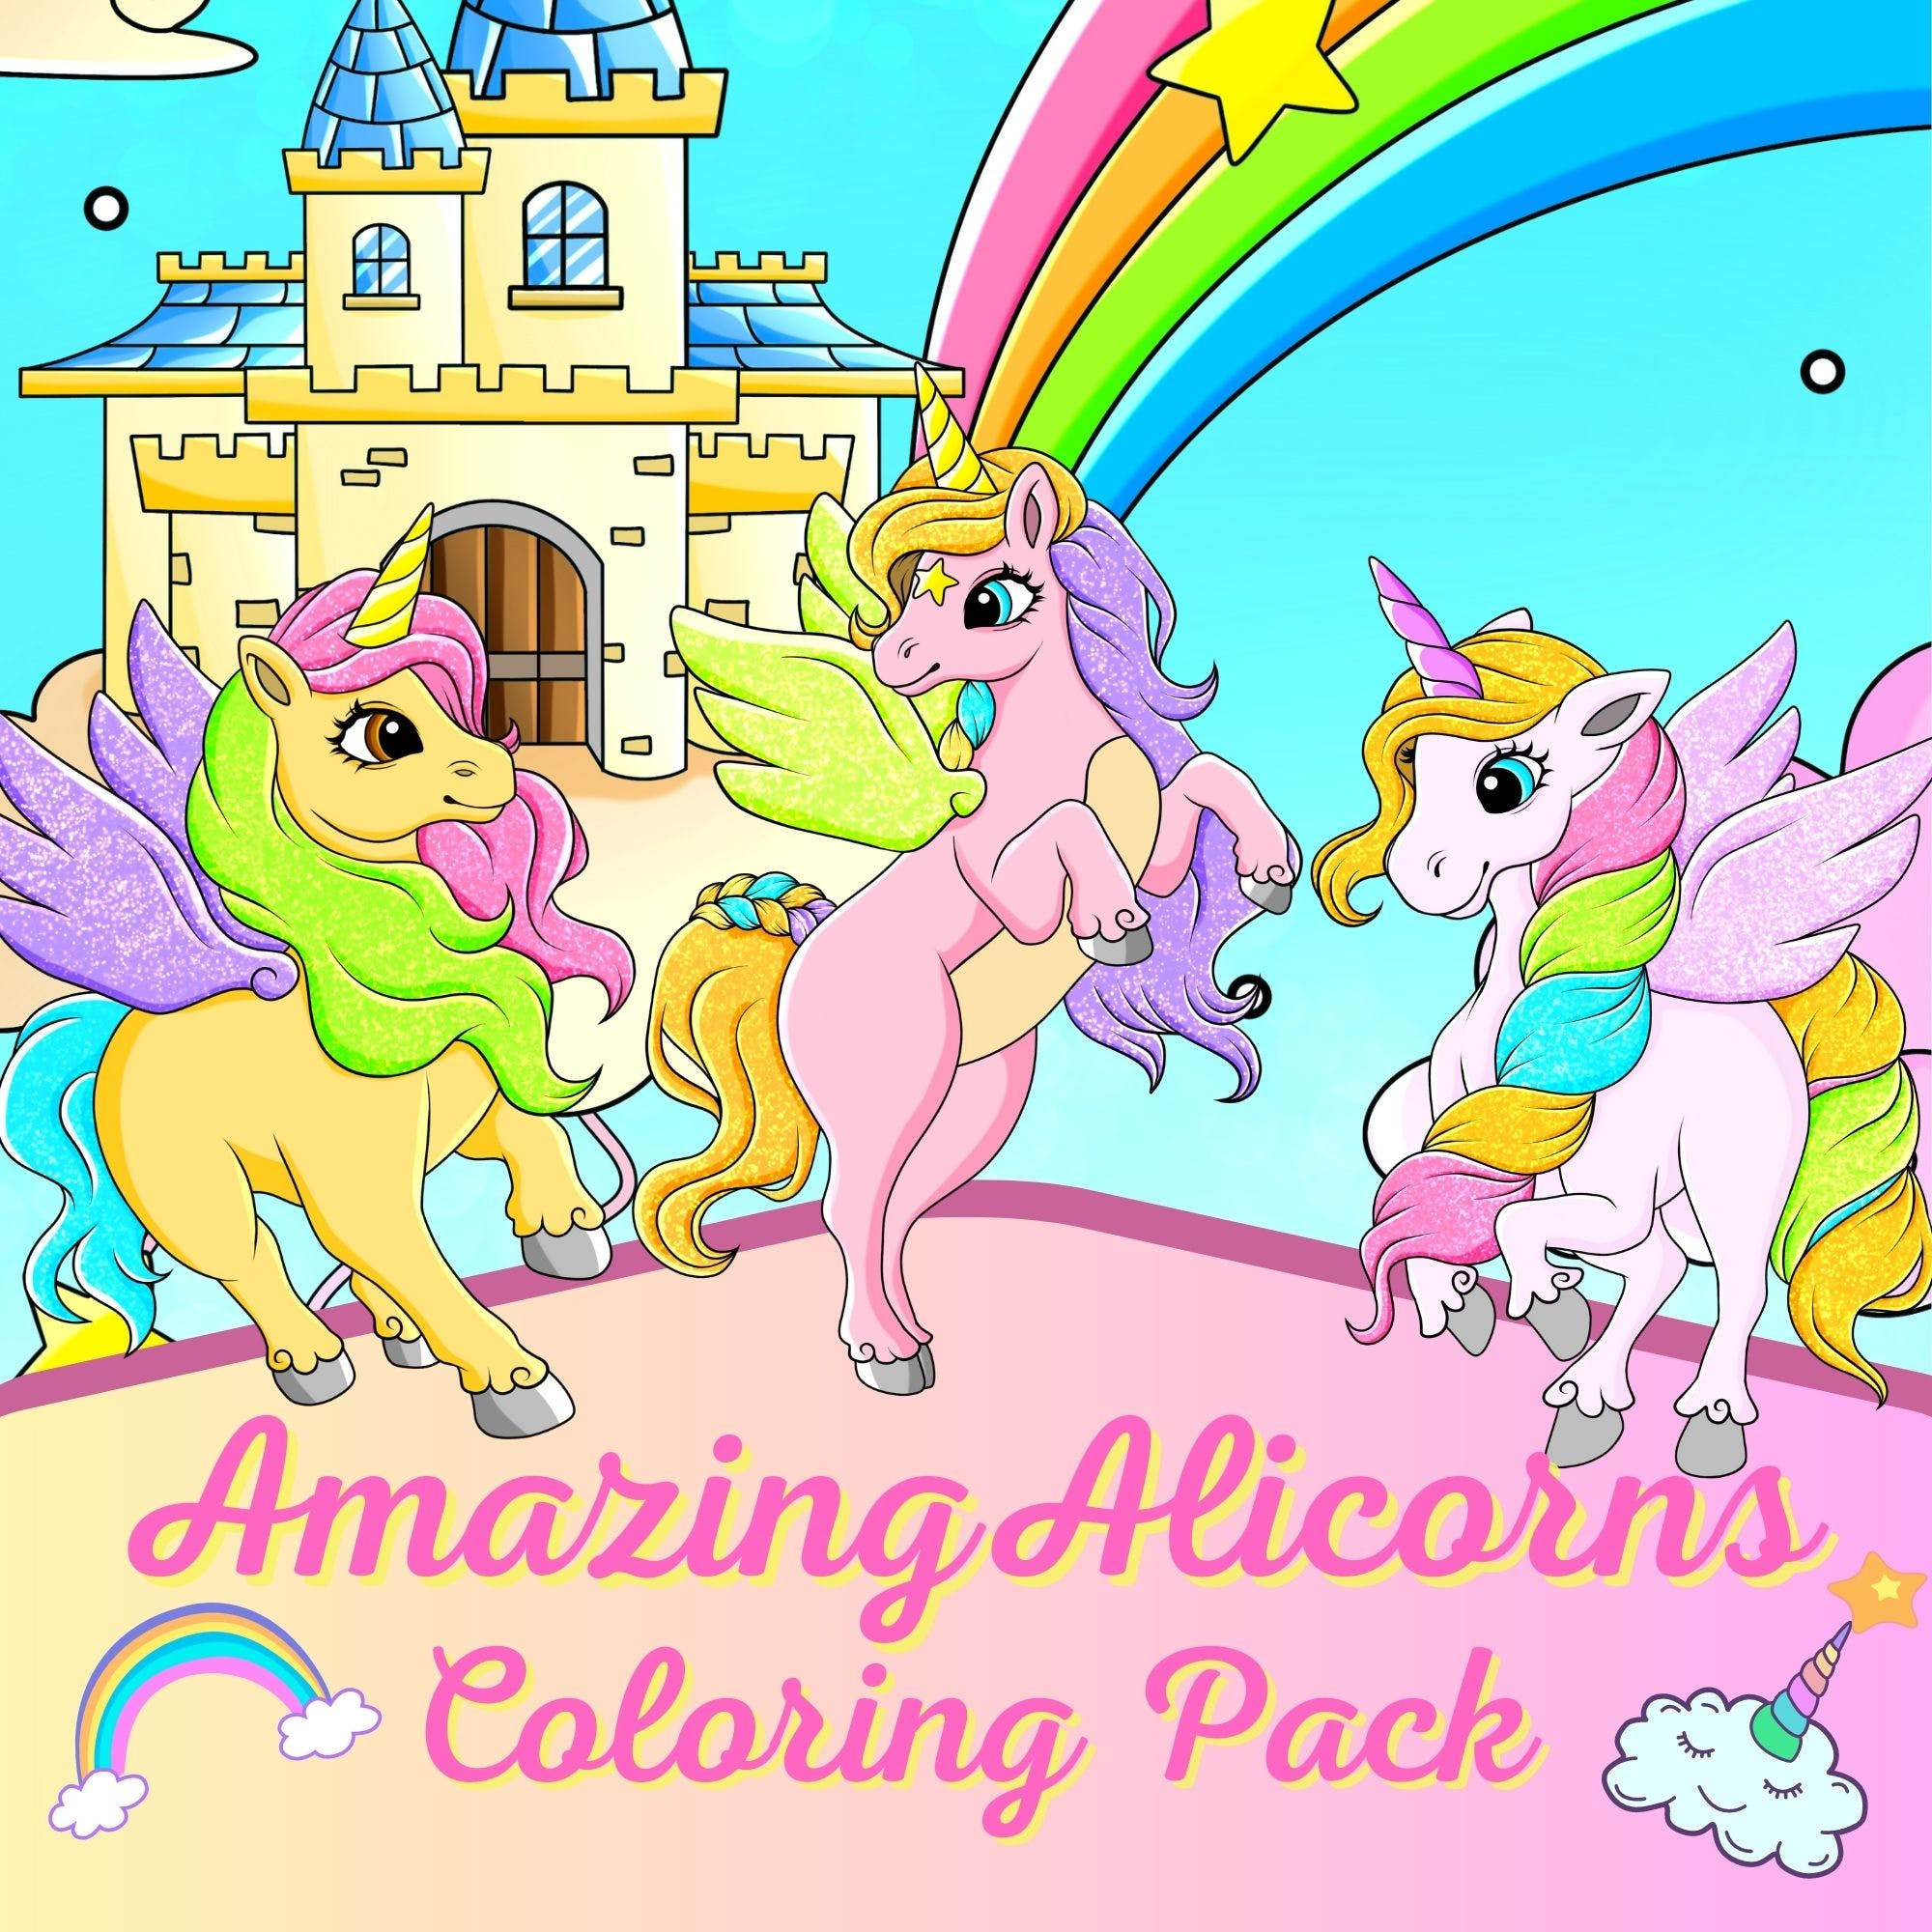 Alicorn Coloring Page Printables for children